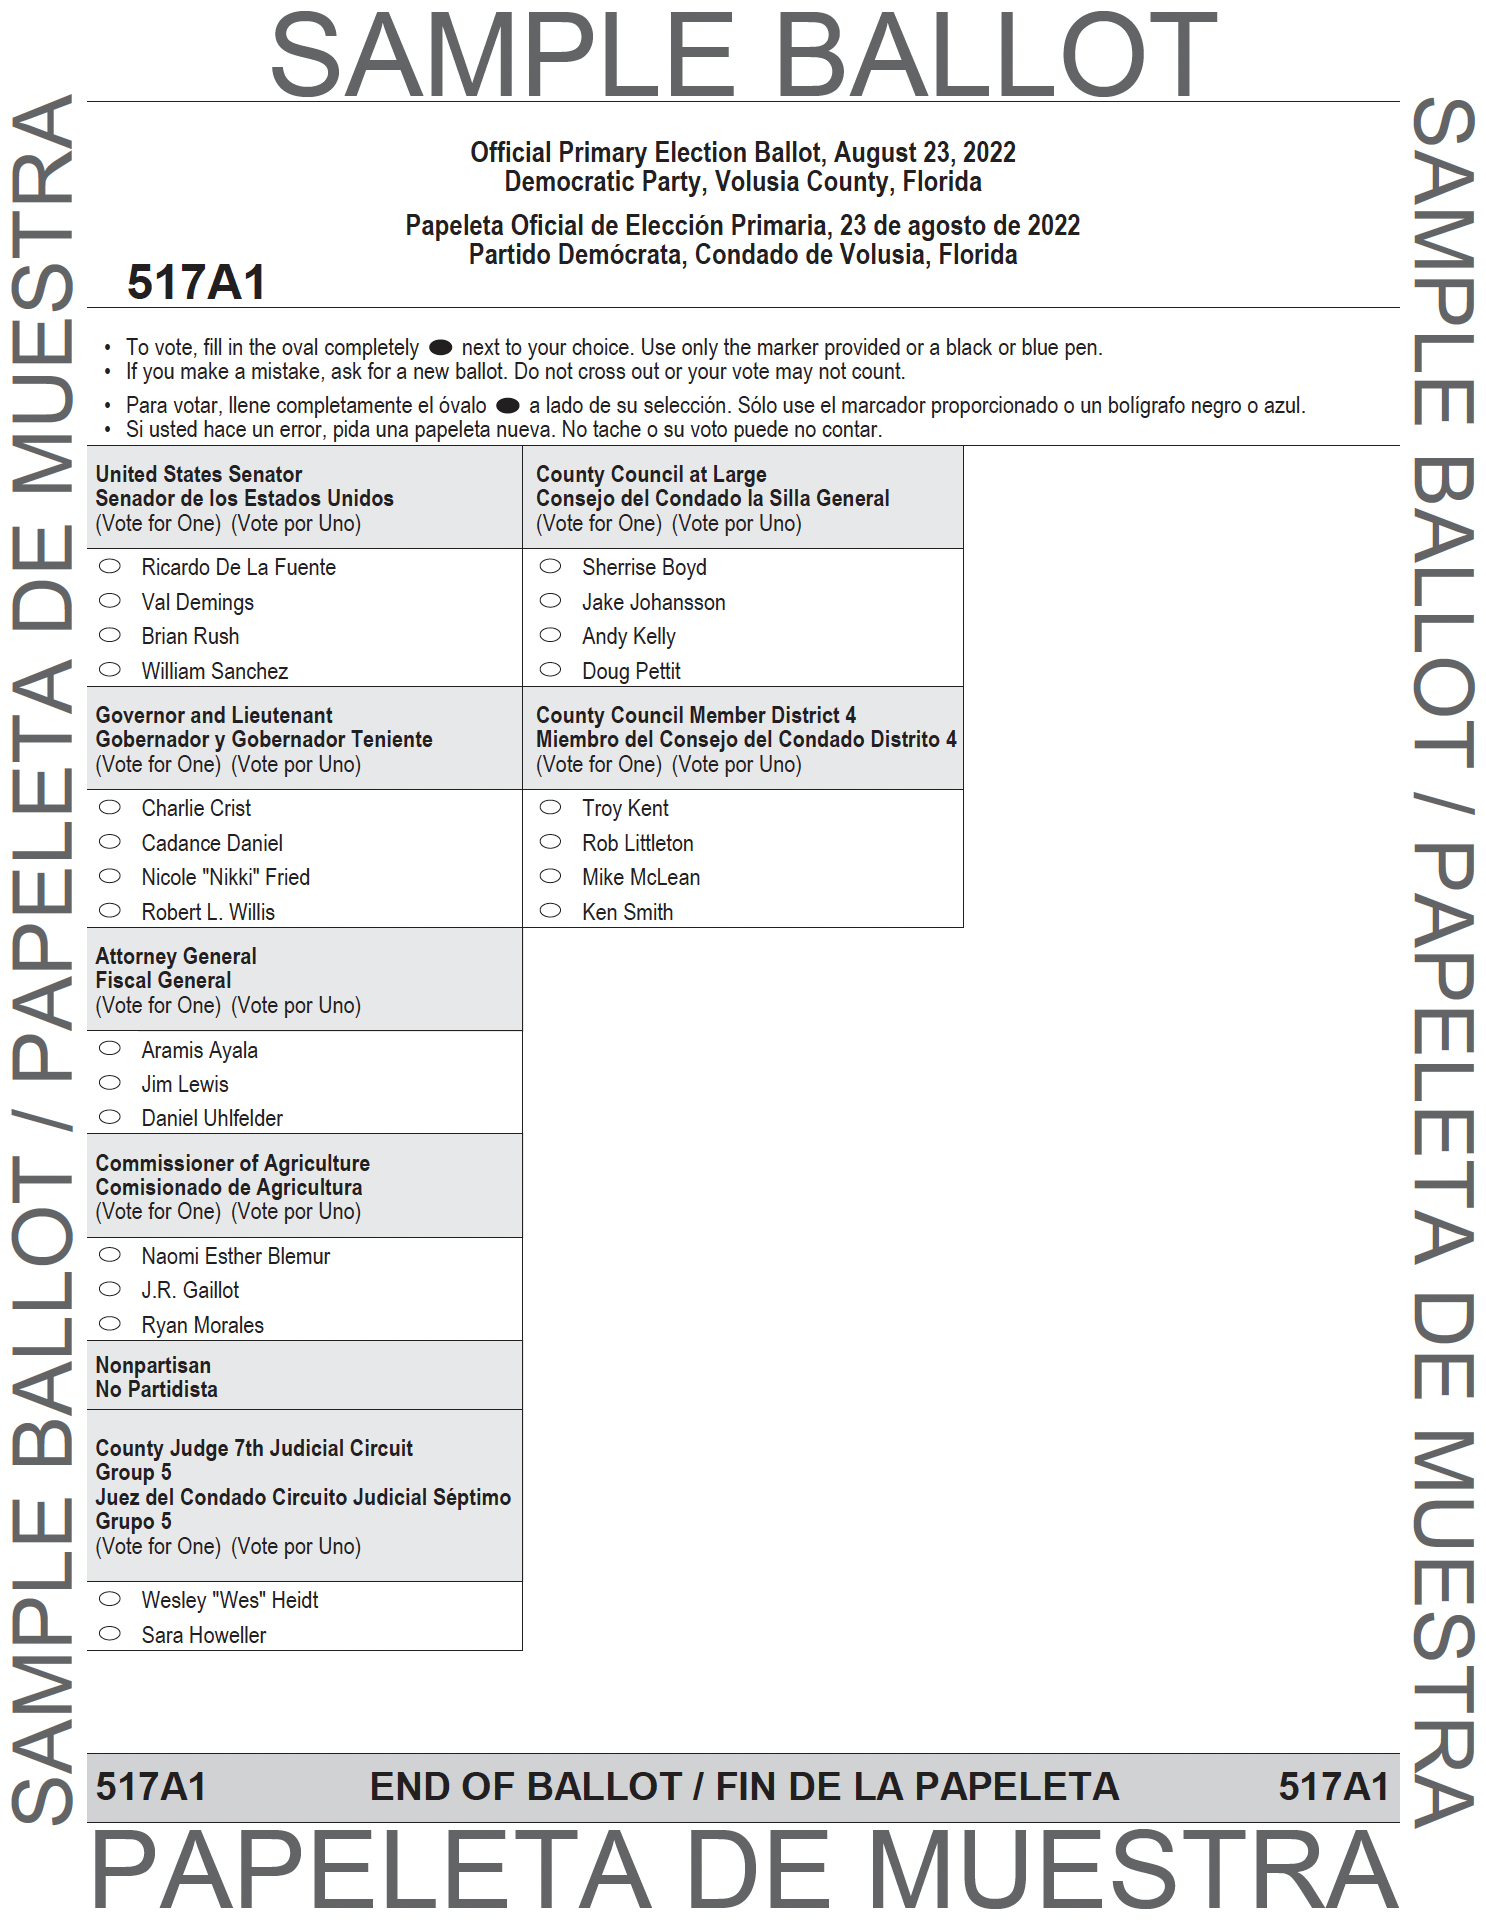 A sample ballot for a Democratic Party voter